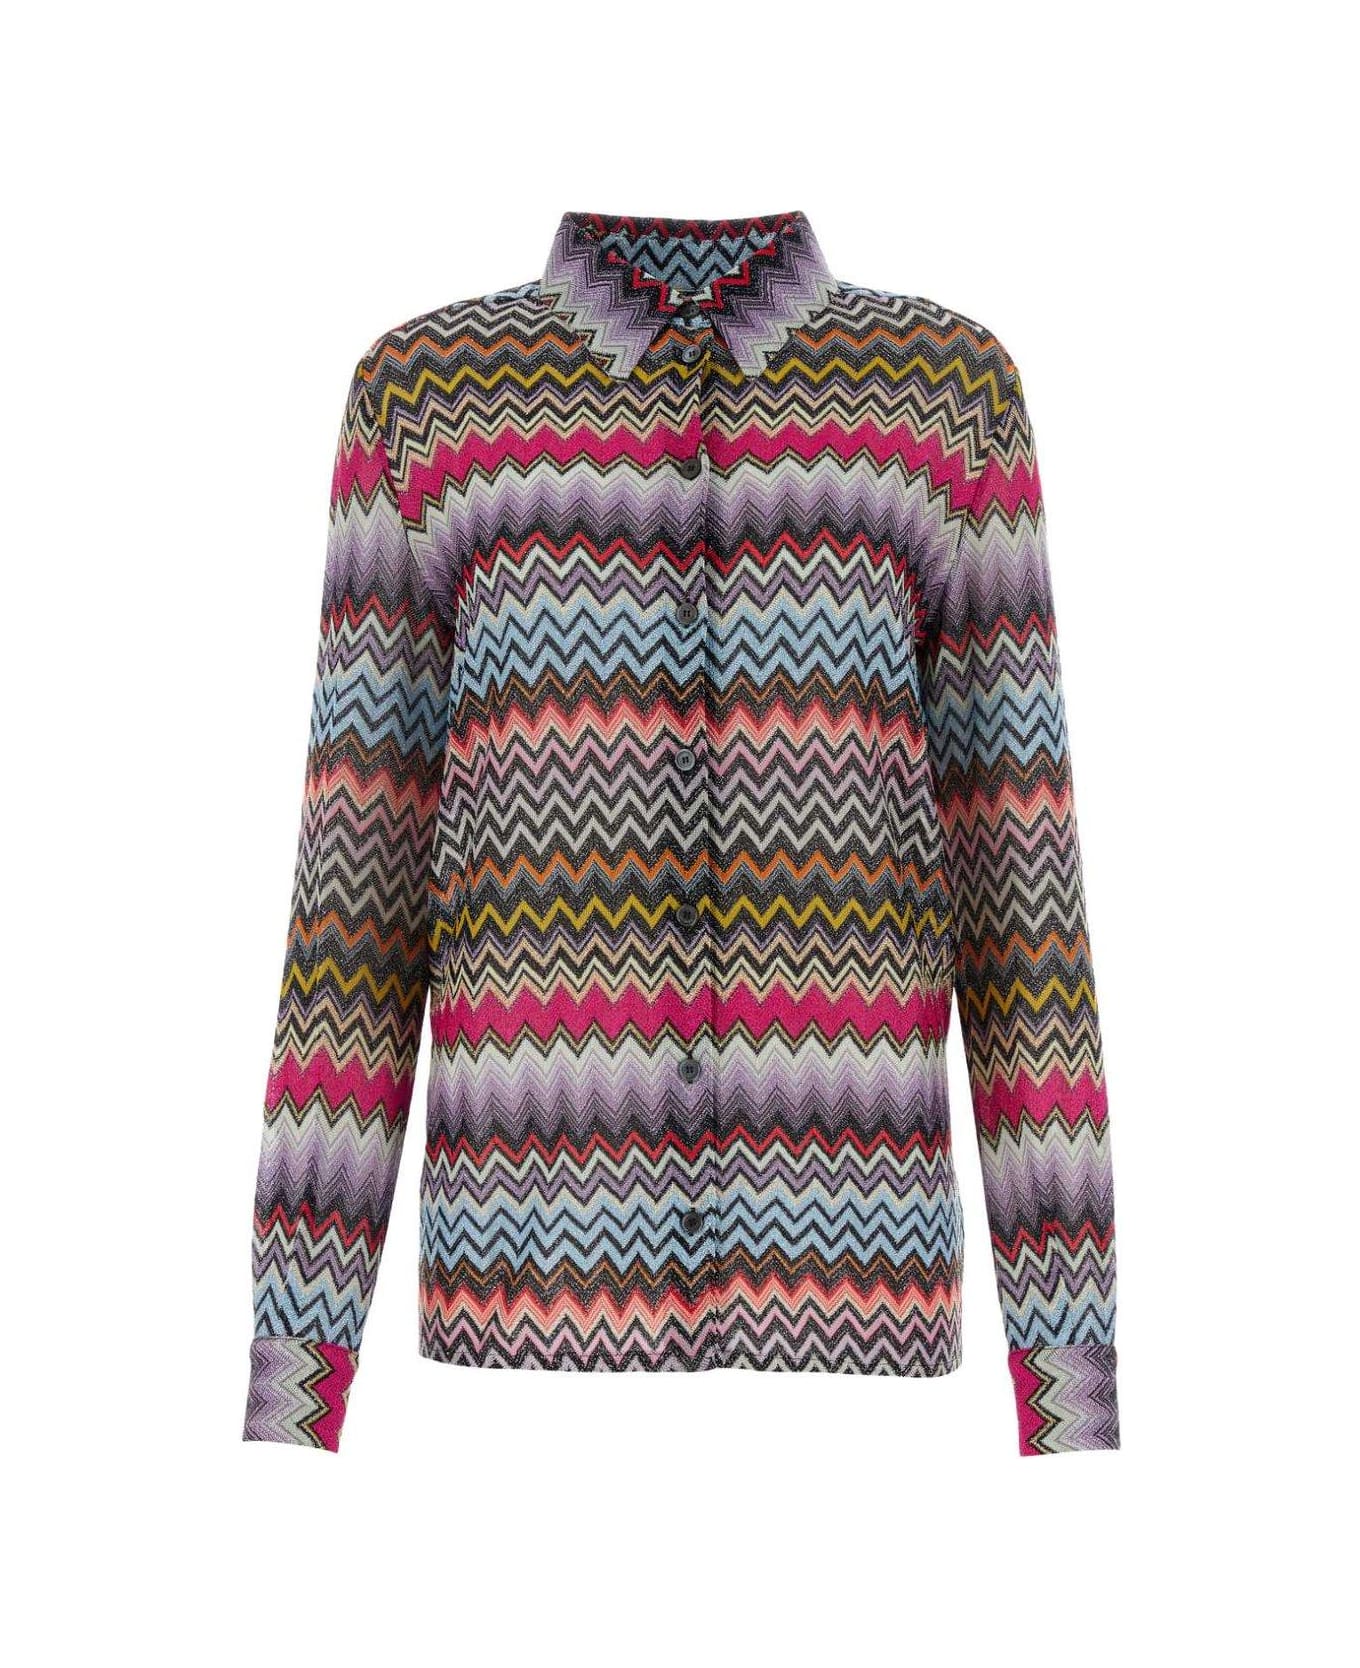 Missoni Patternede Embroidered Button-up Long-sleeved Shirt - Multicolor シャツ